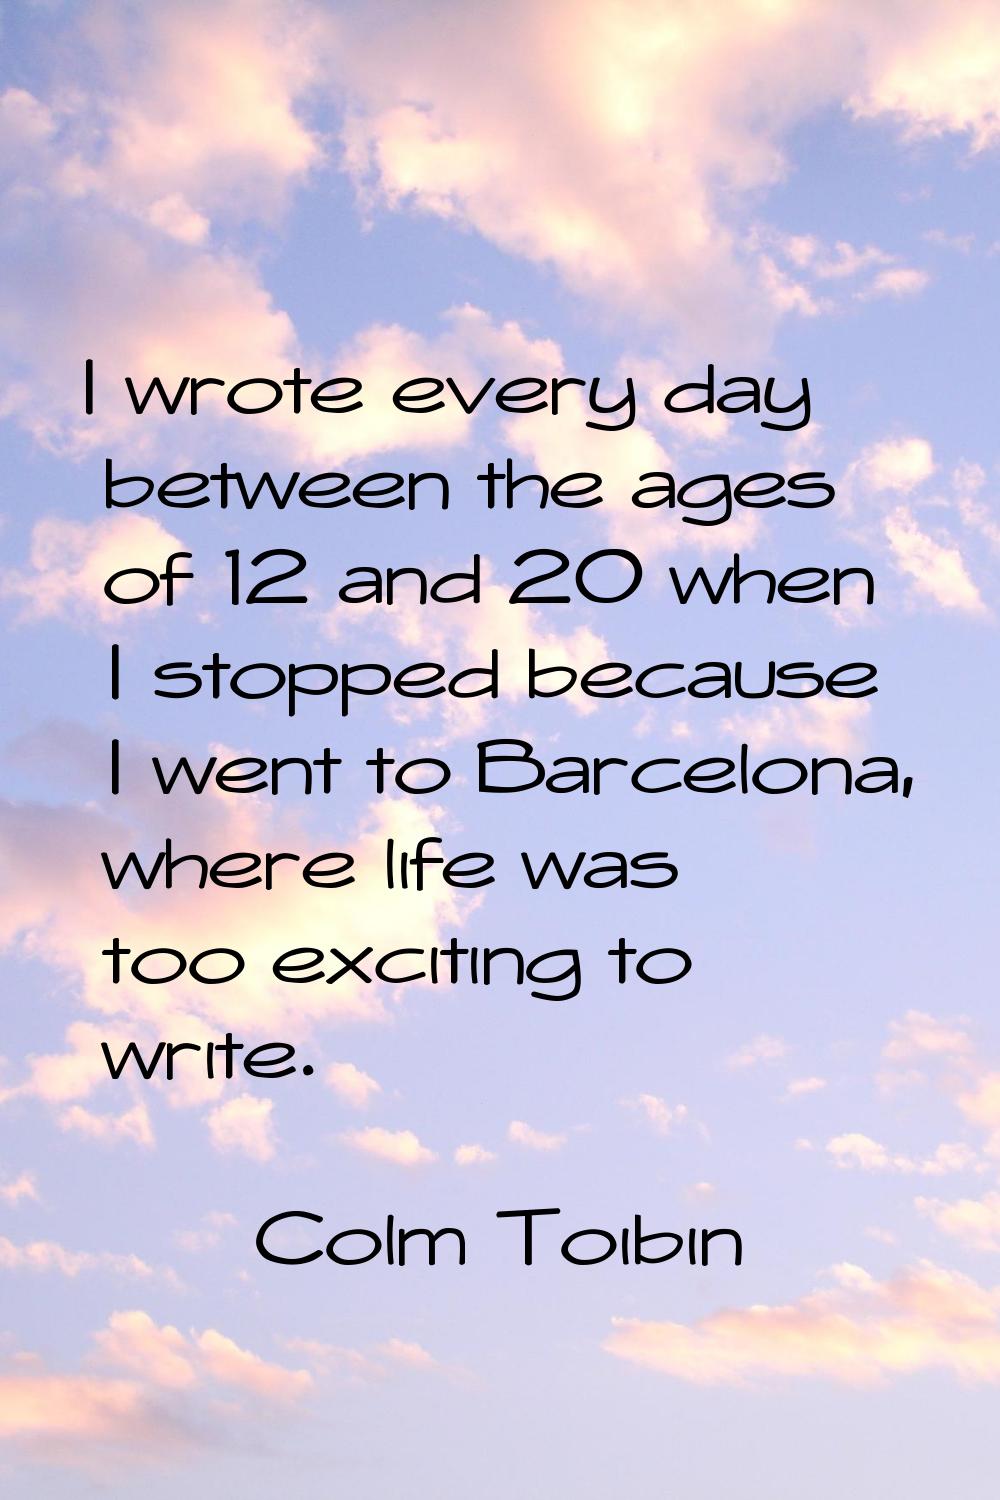 I wrote every day between the ages of 12 and 20 when I stopped because I went to Barcelona, where l